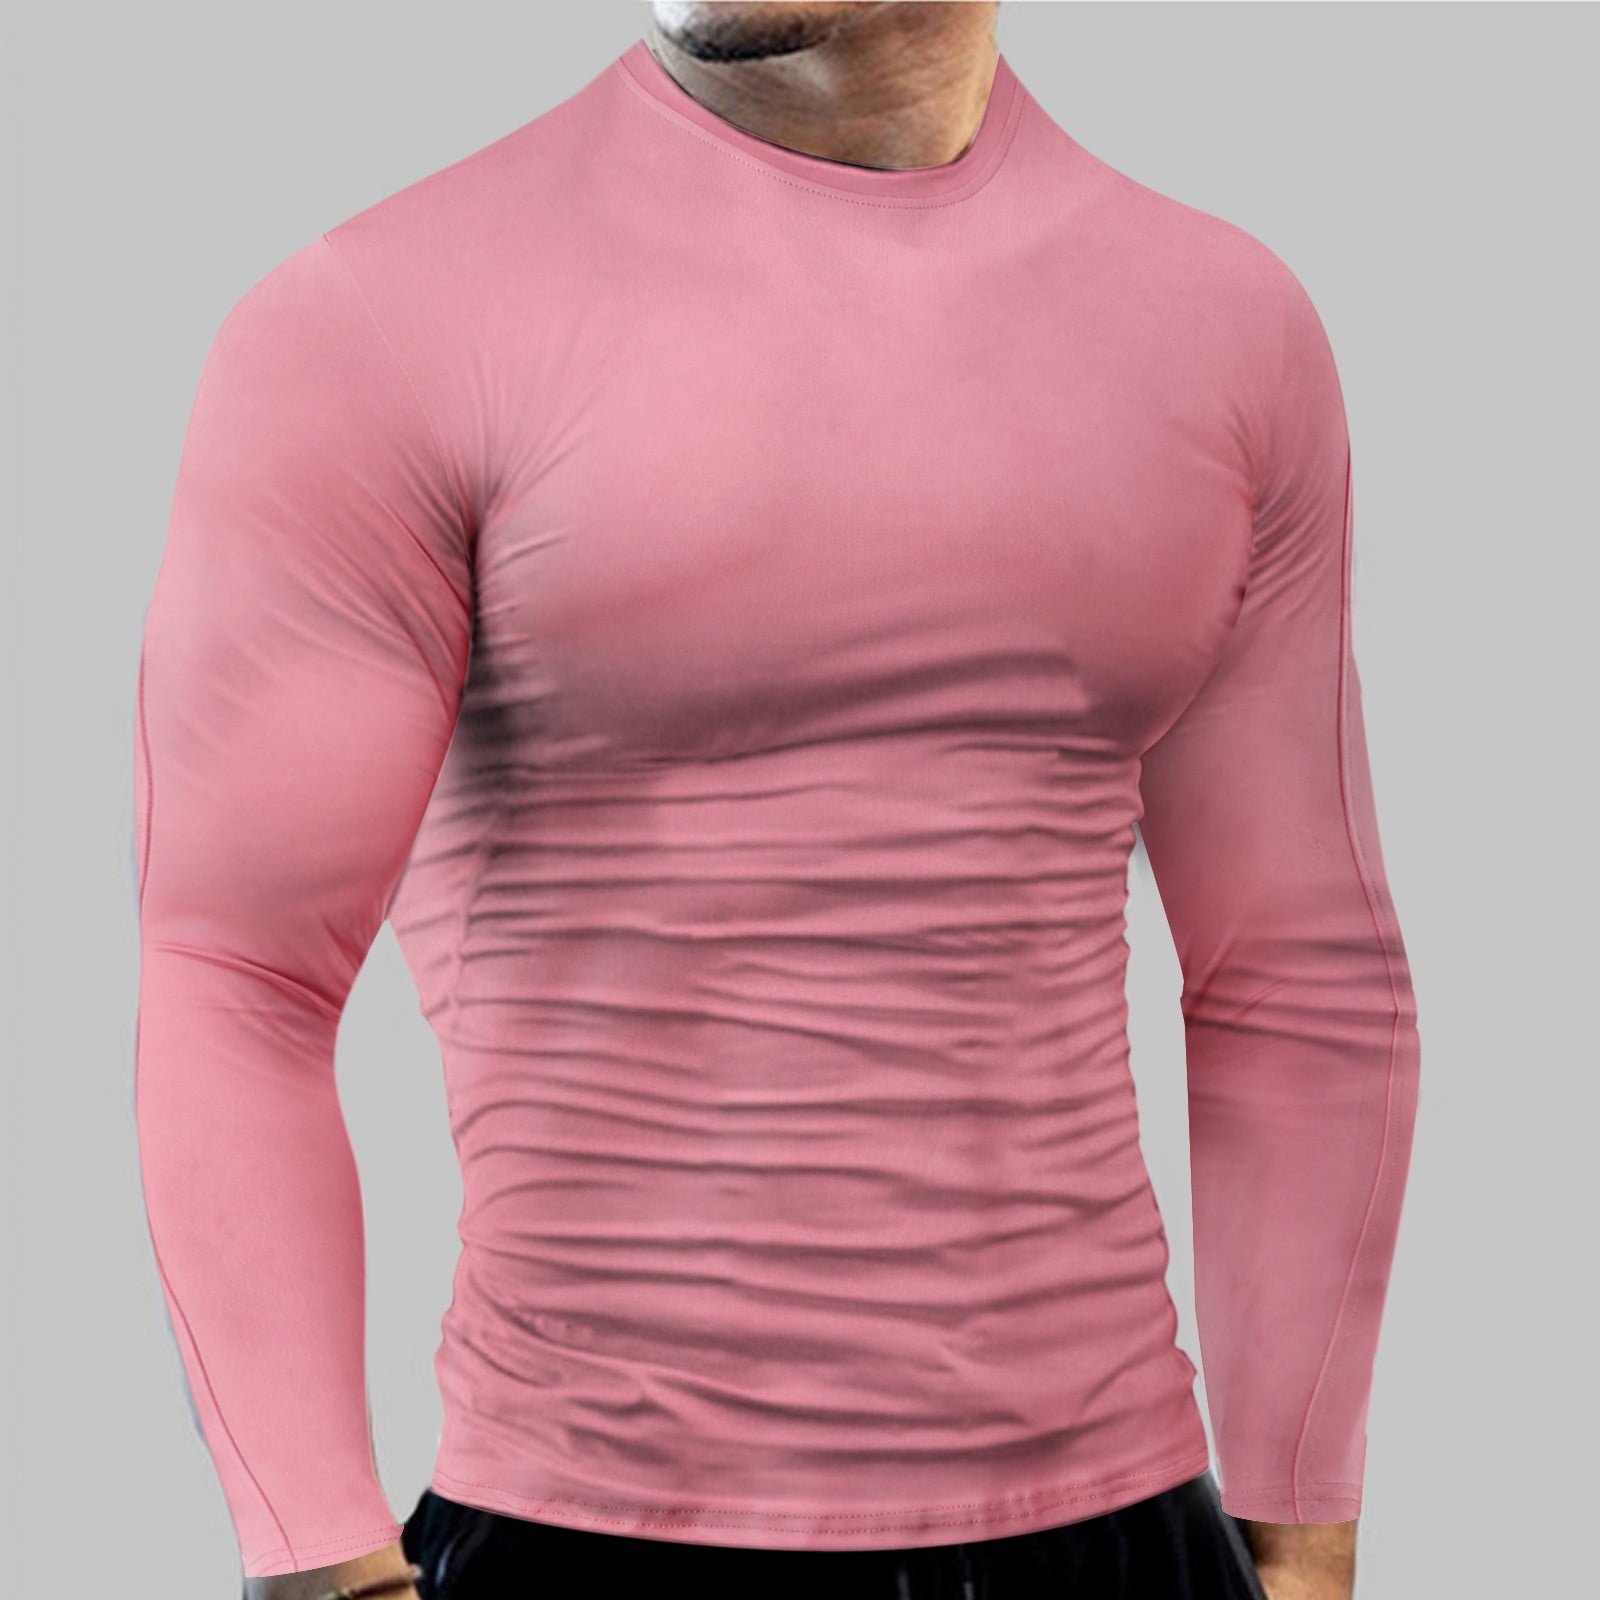 Wozhidaose Compression Shirts for Men Fitness Sports Long Sleeve T Shirt  Round Neck Solid Tight Elastic Bottoming Top Comfort Colors Tshirt Beige L  